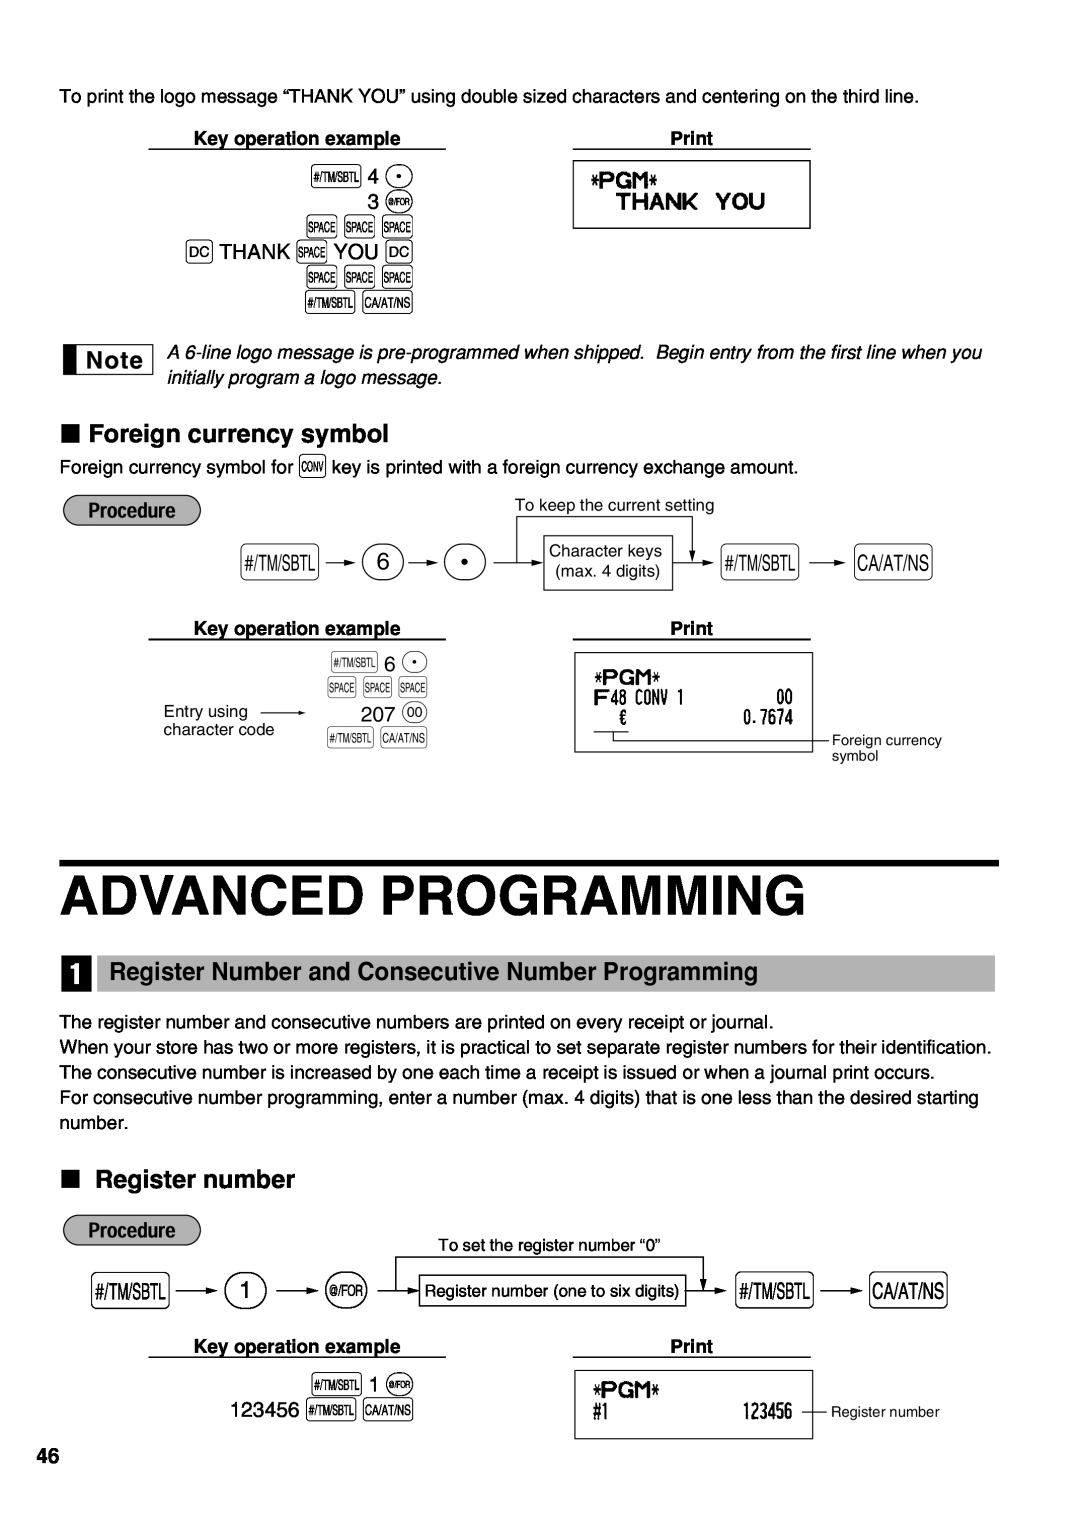 Sharp XE-A21S Advanced Programming, 3 @ SSS, SSS sA, s1 @, S S S, Foreign currency symbol, Register number, s 4 P, s 6 P 